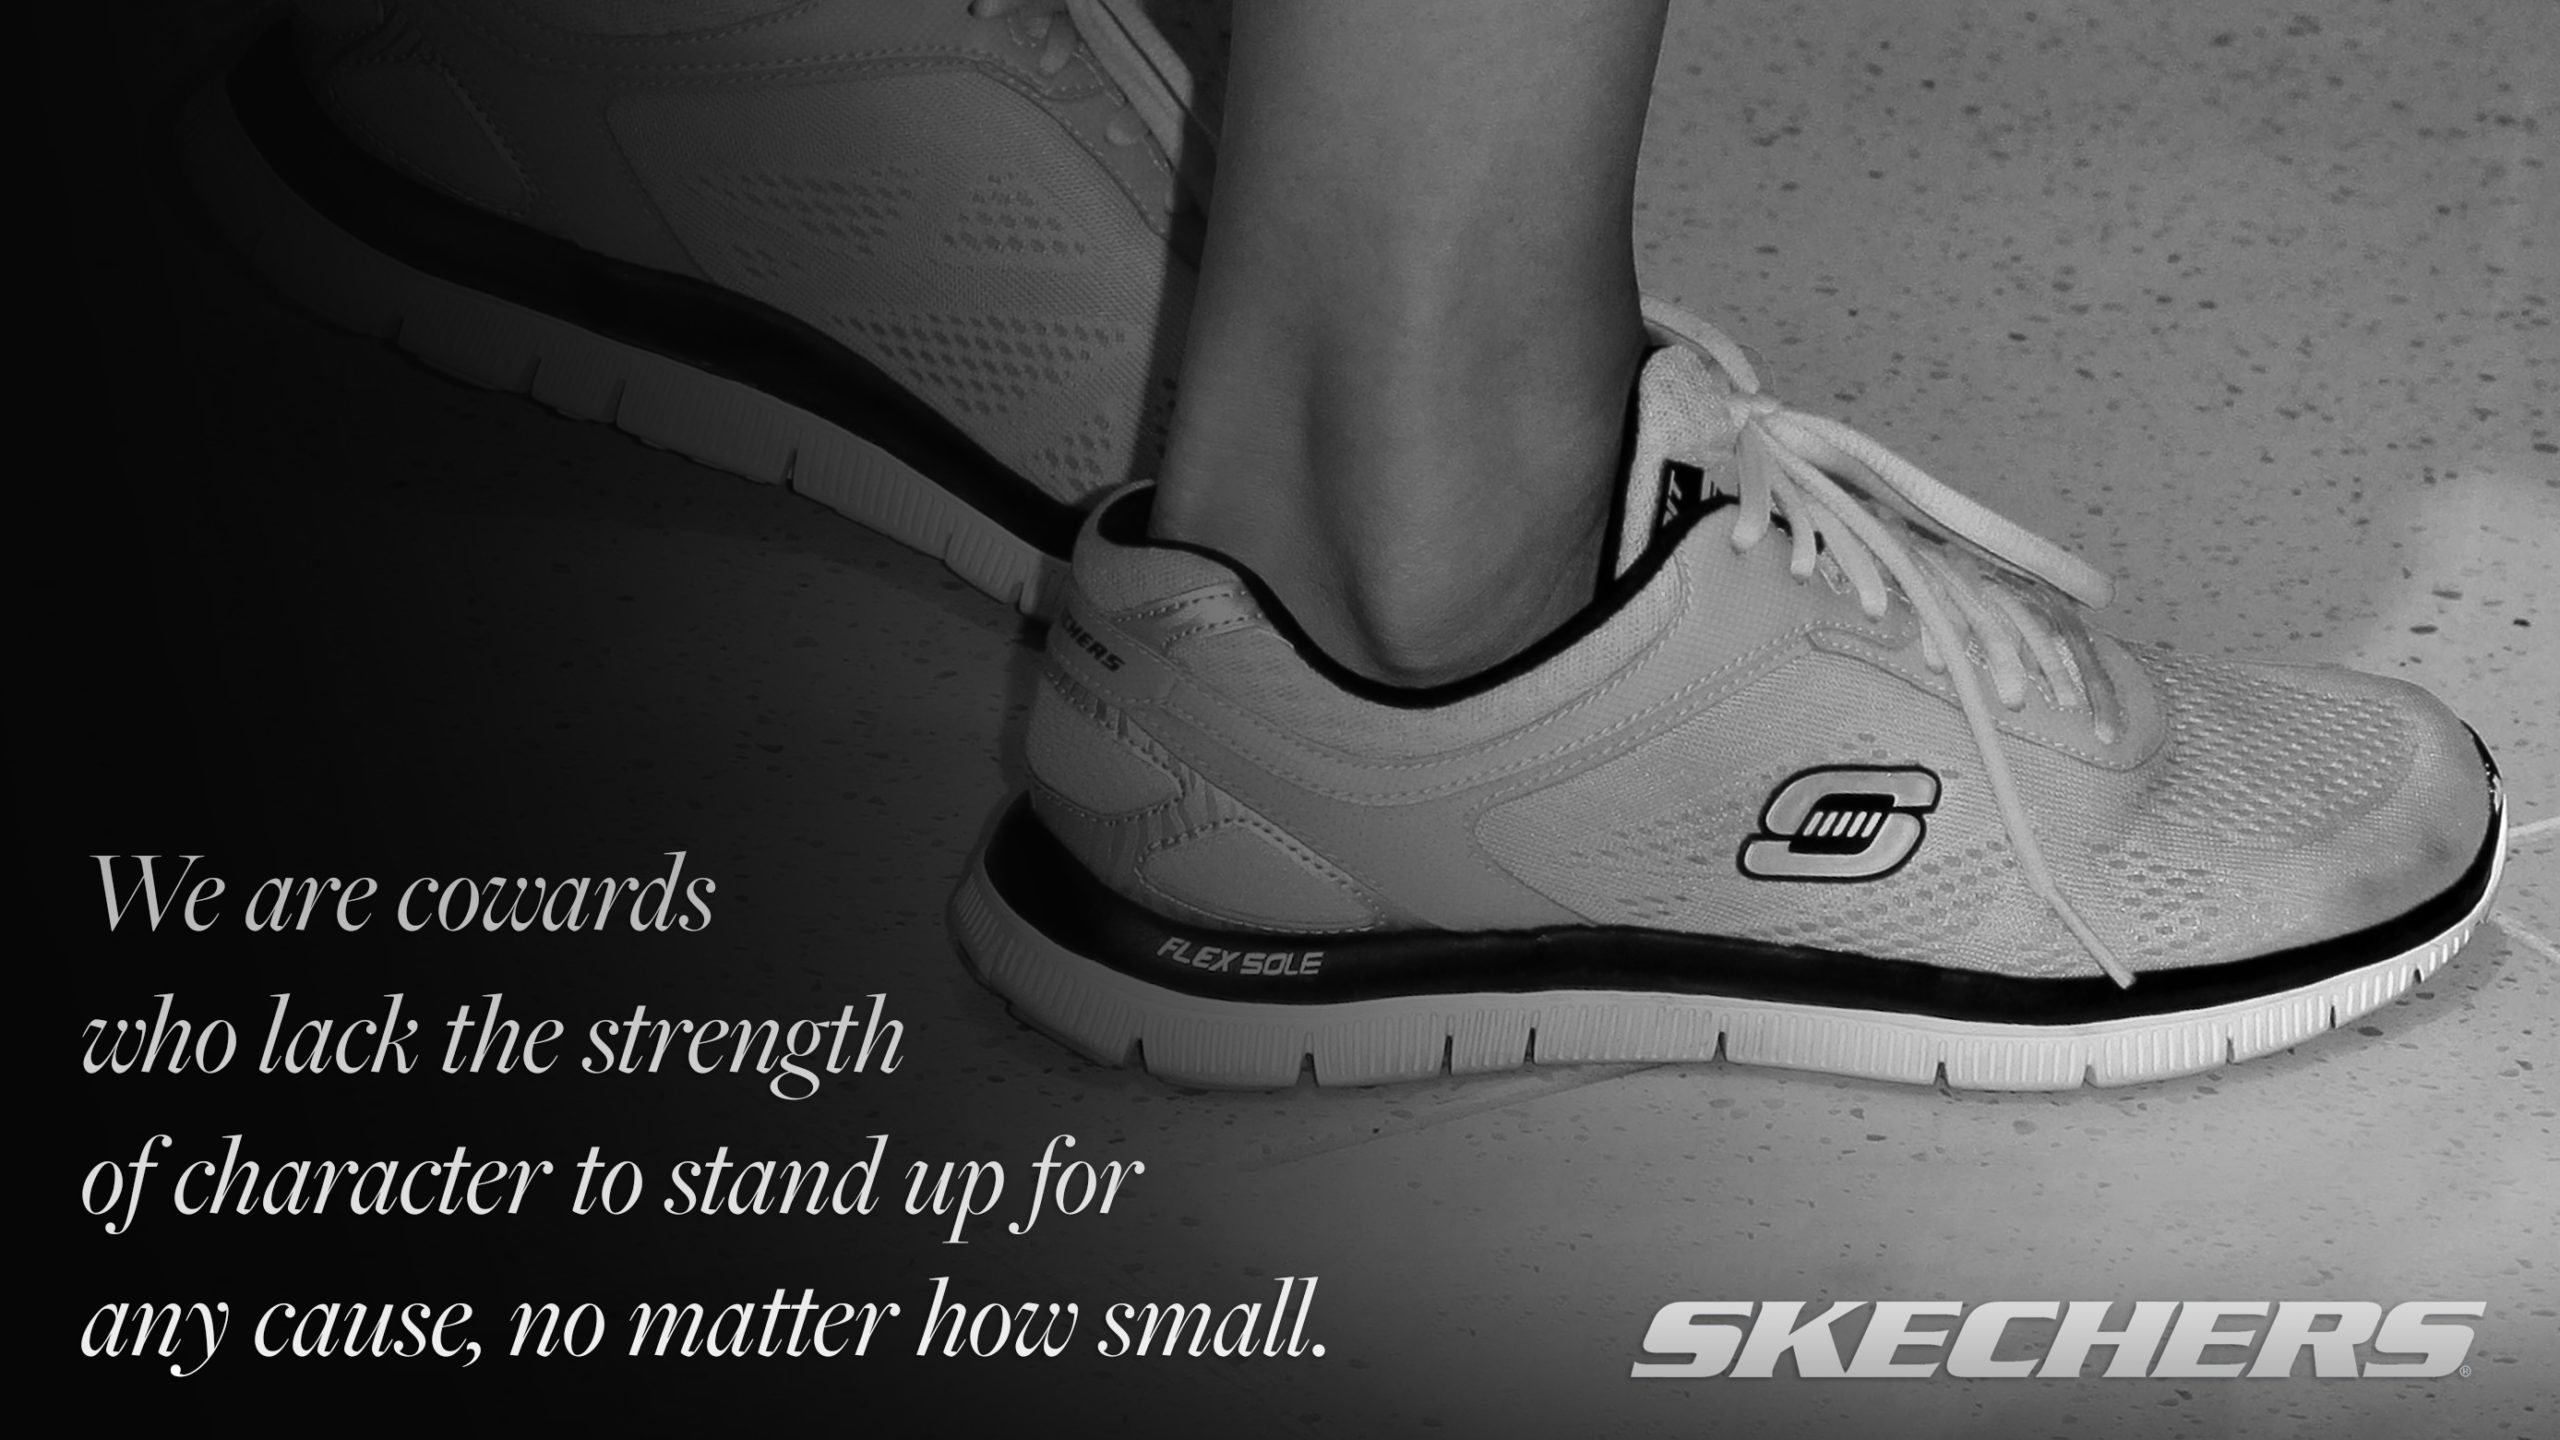 skechers shoes commercial